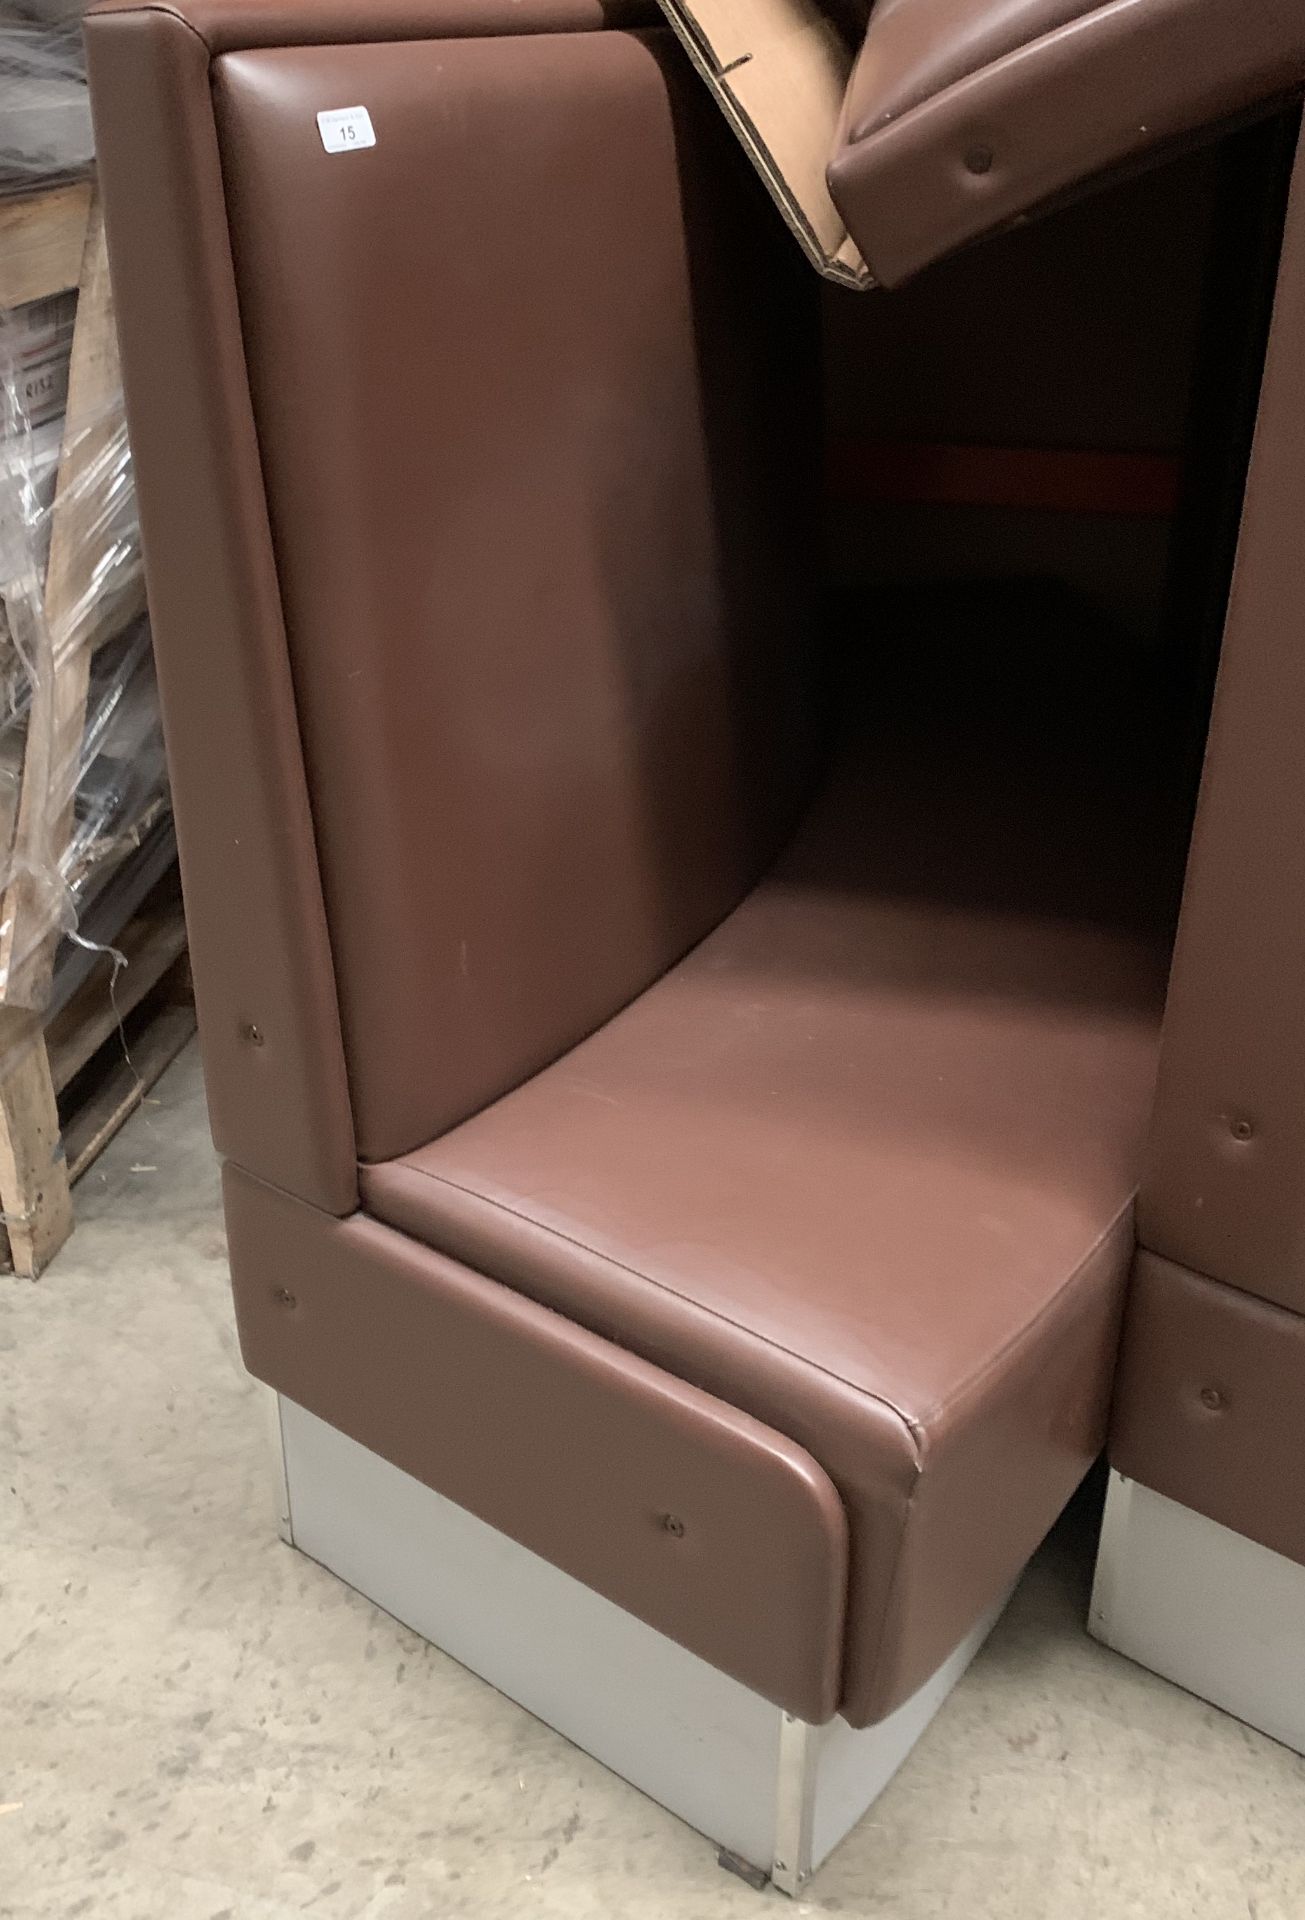 Chocolate brown vinyl upholstered curved